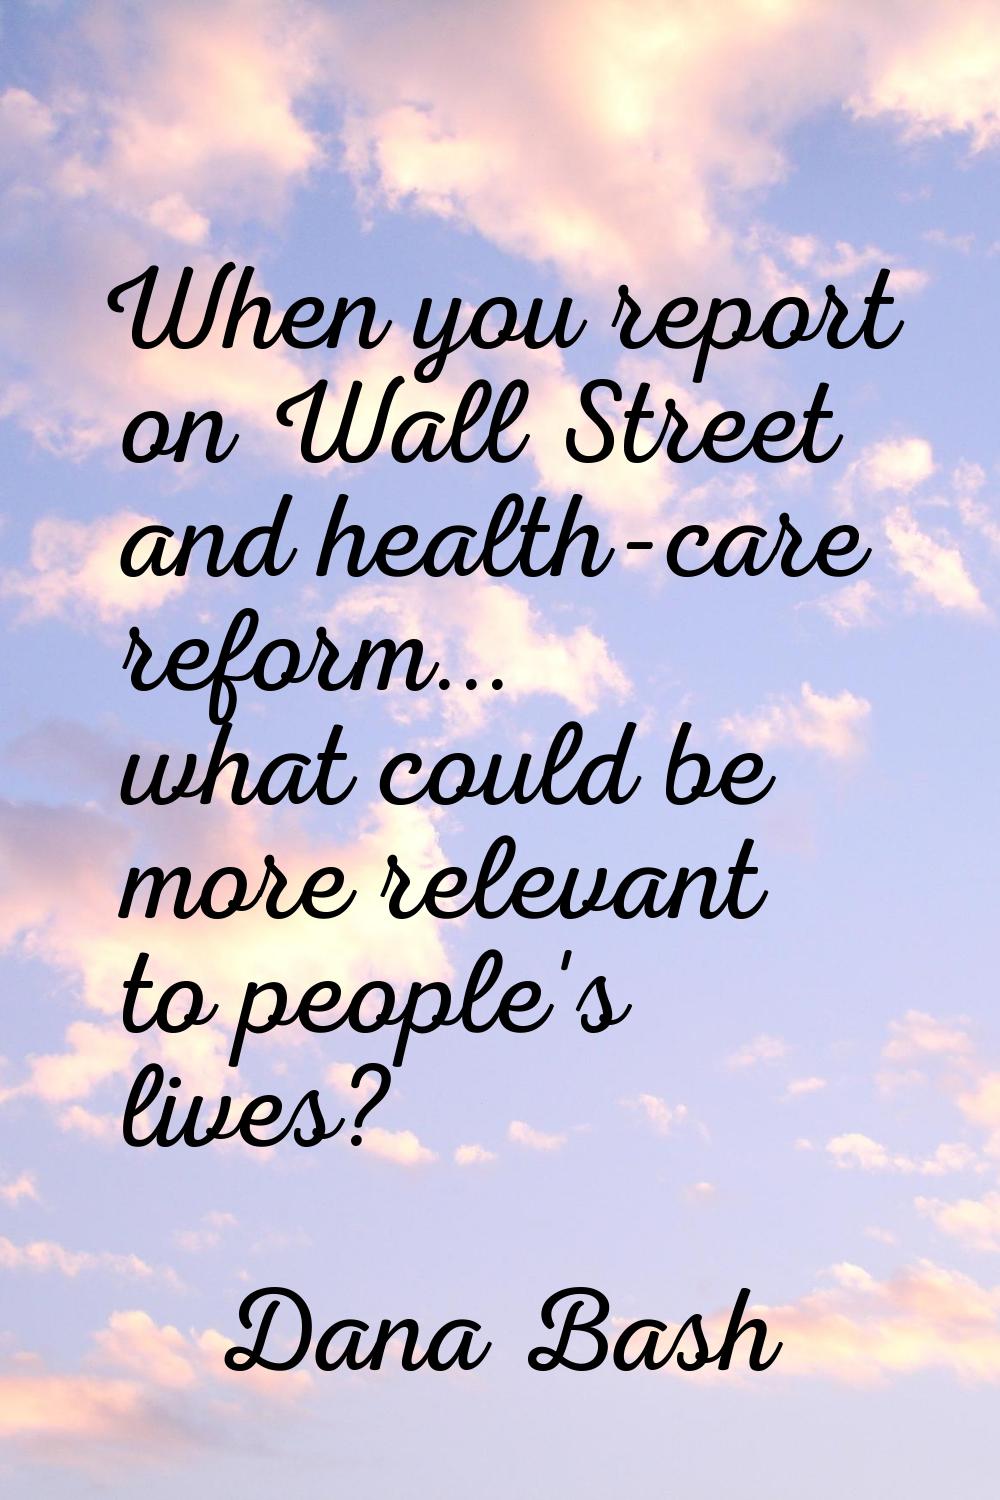 When you report on Wall Street and health-care reform... what could be more relevant to people's li